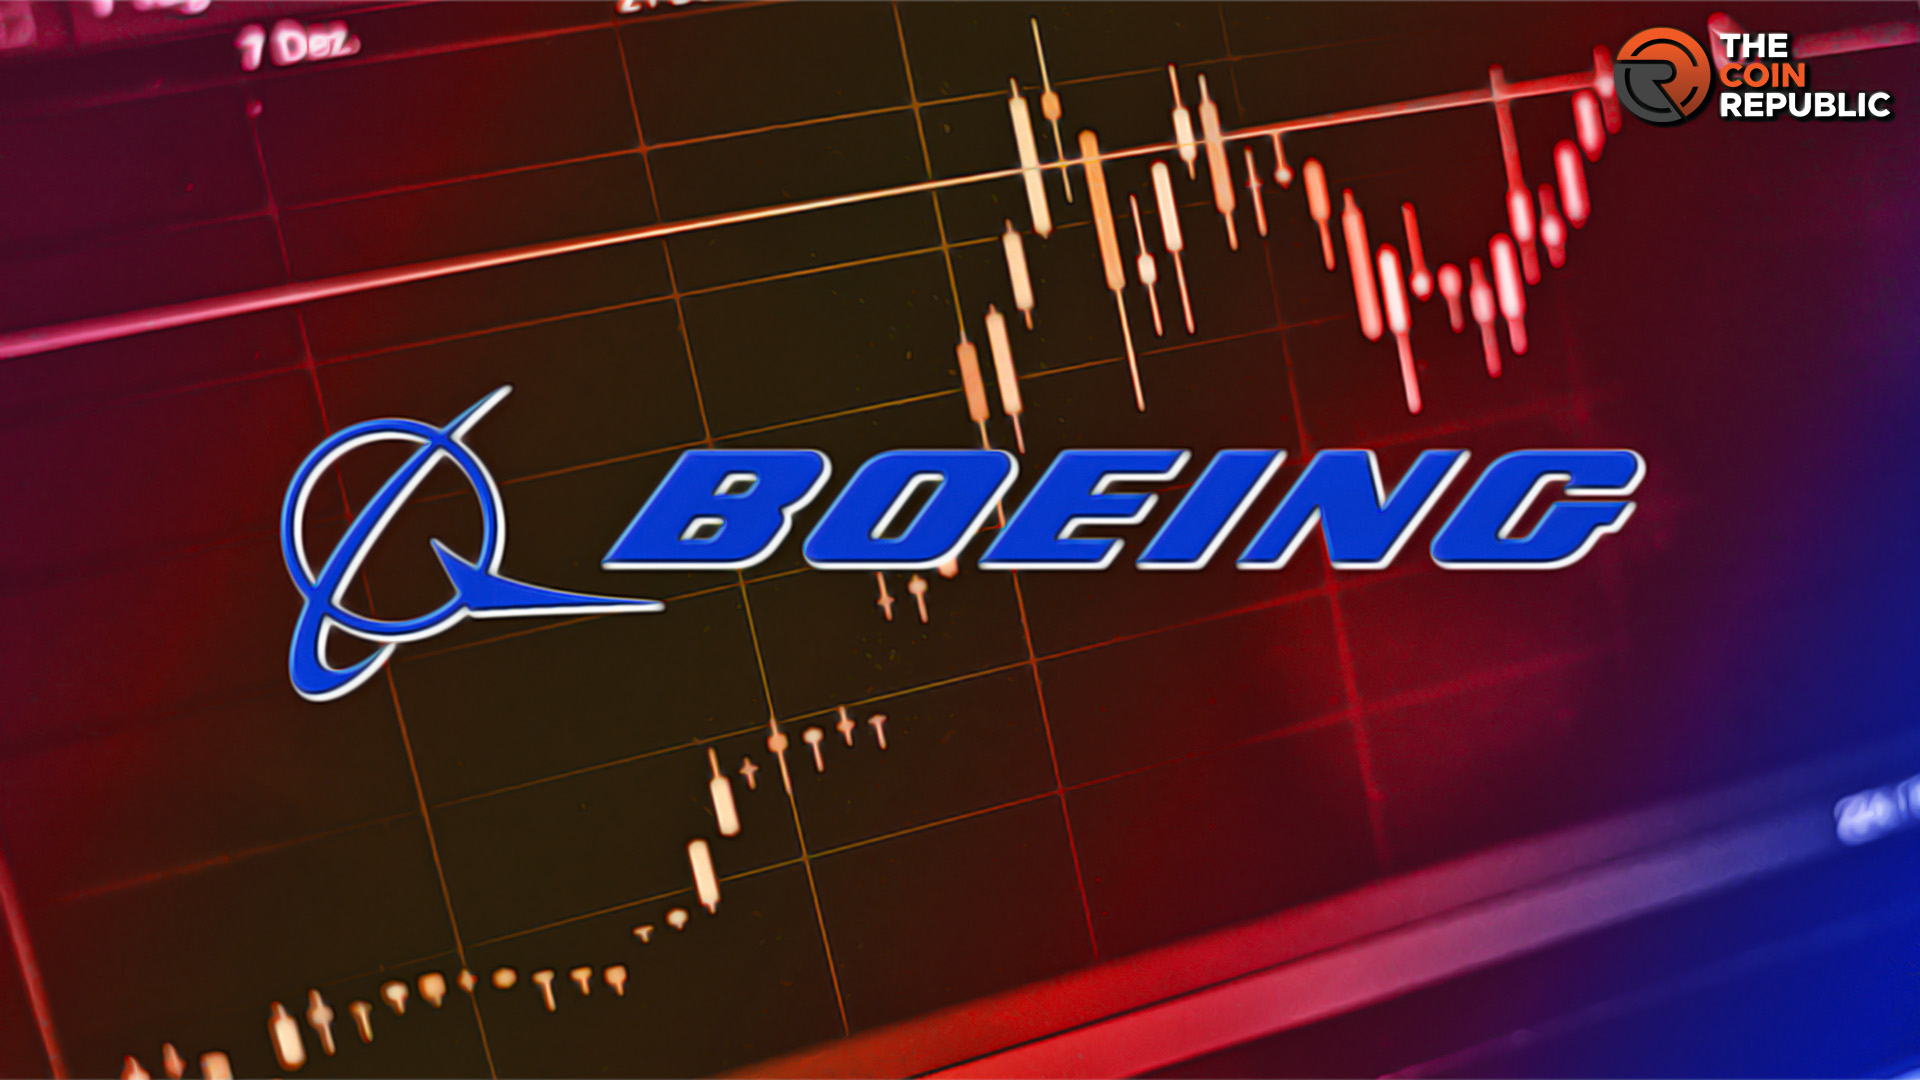 Boeing Stock Price Prediction: BA Stock Gains 15% After Results?